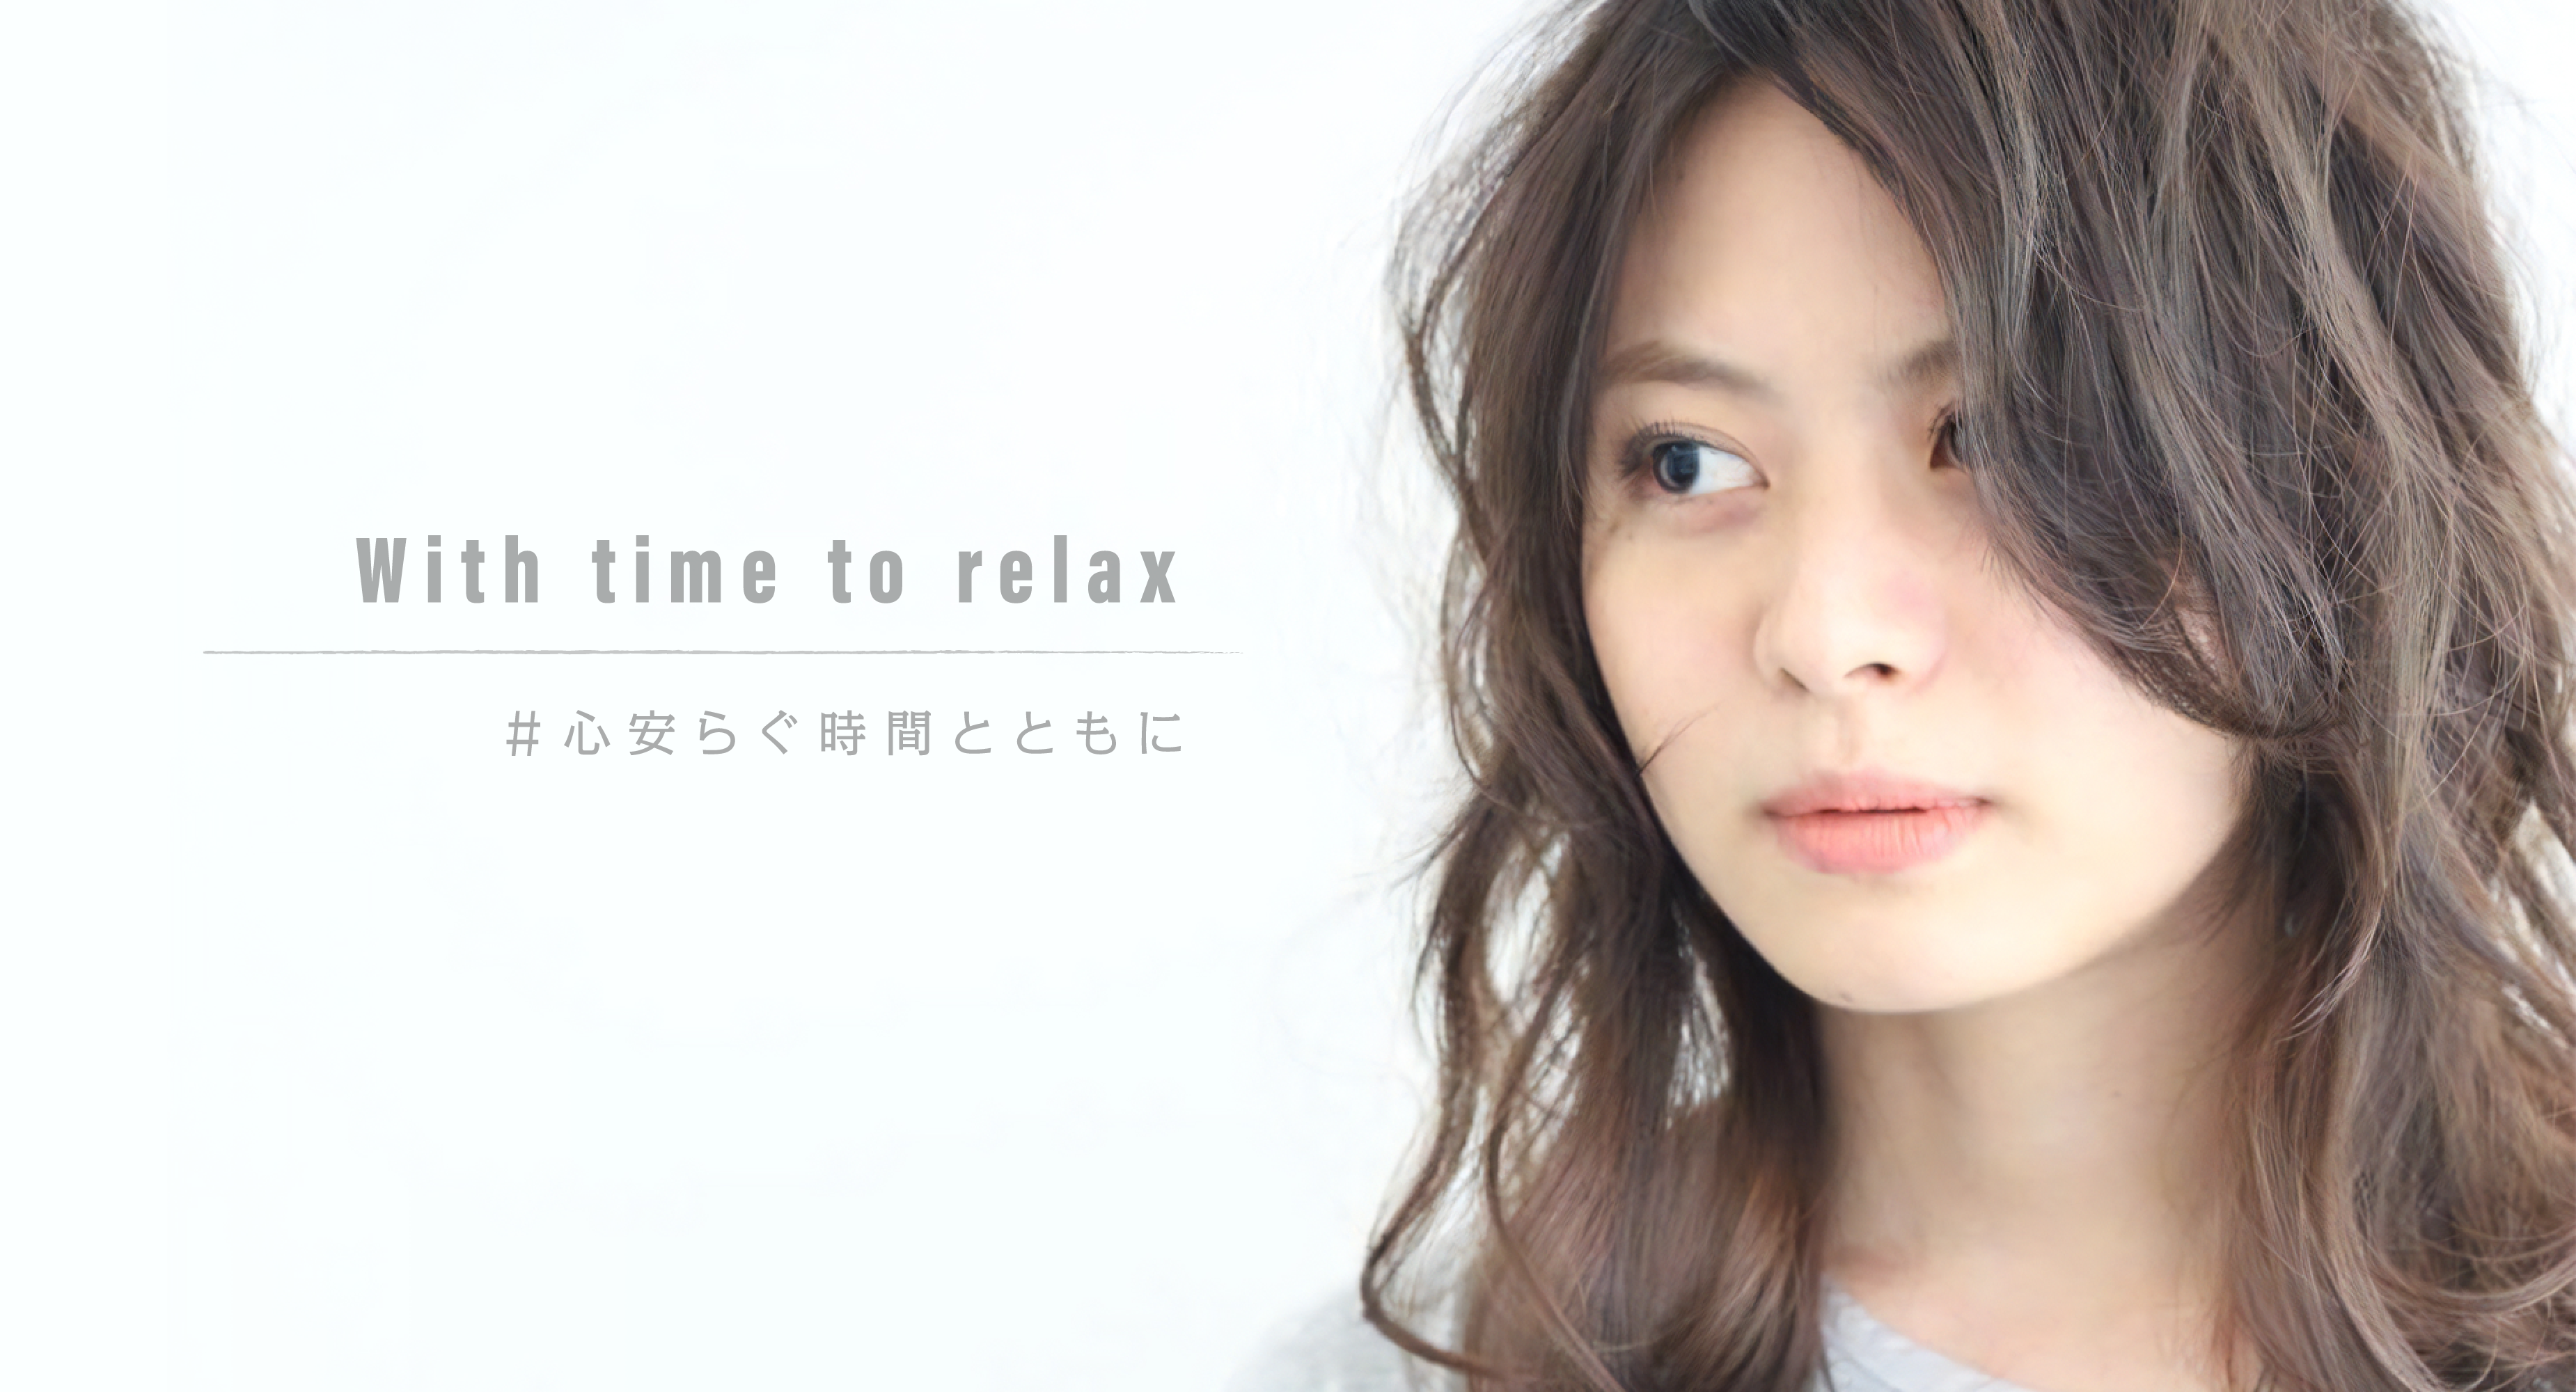 With time to relax ＃心安らぐ時間とともに